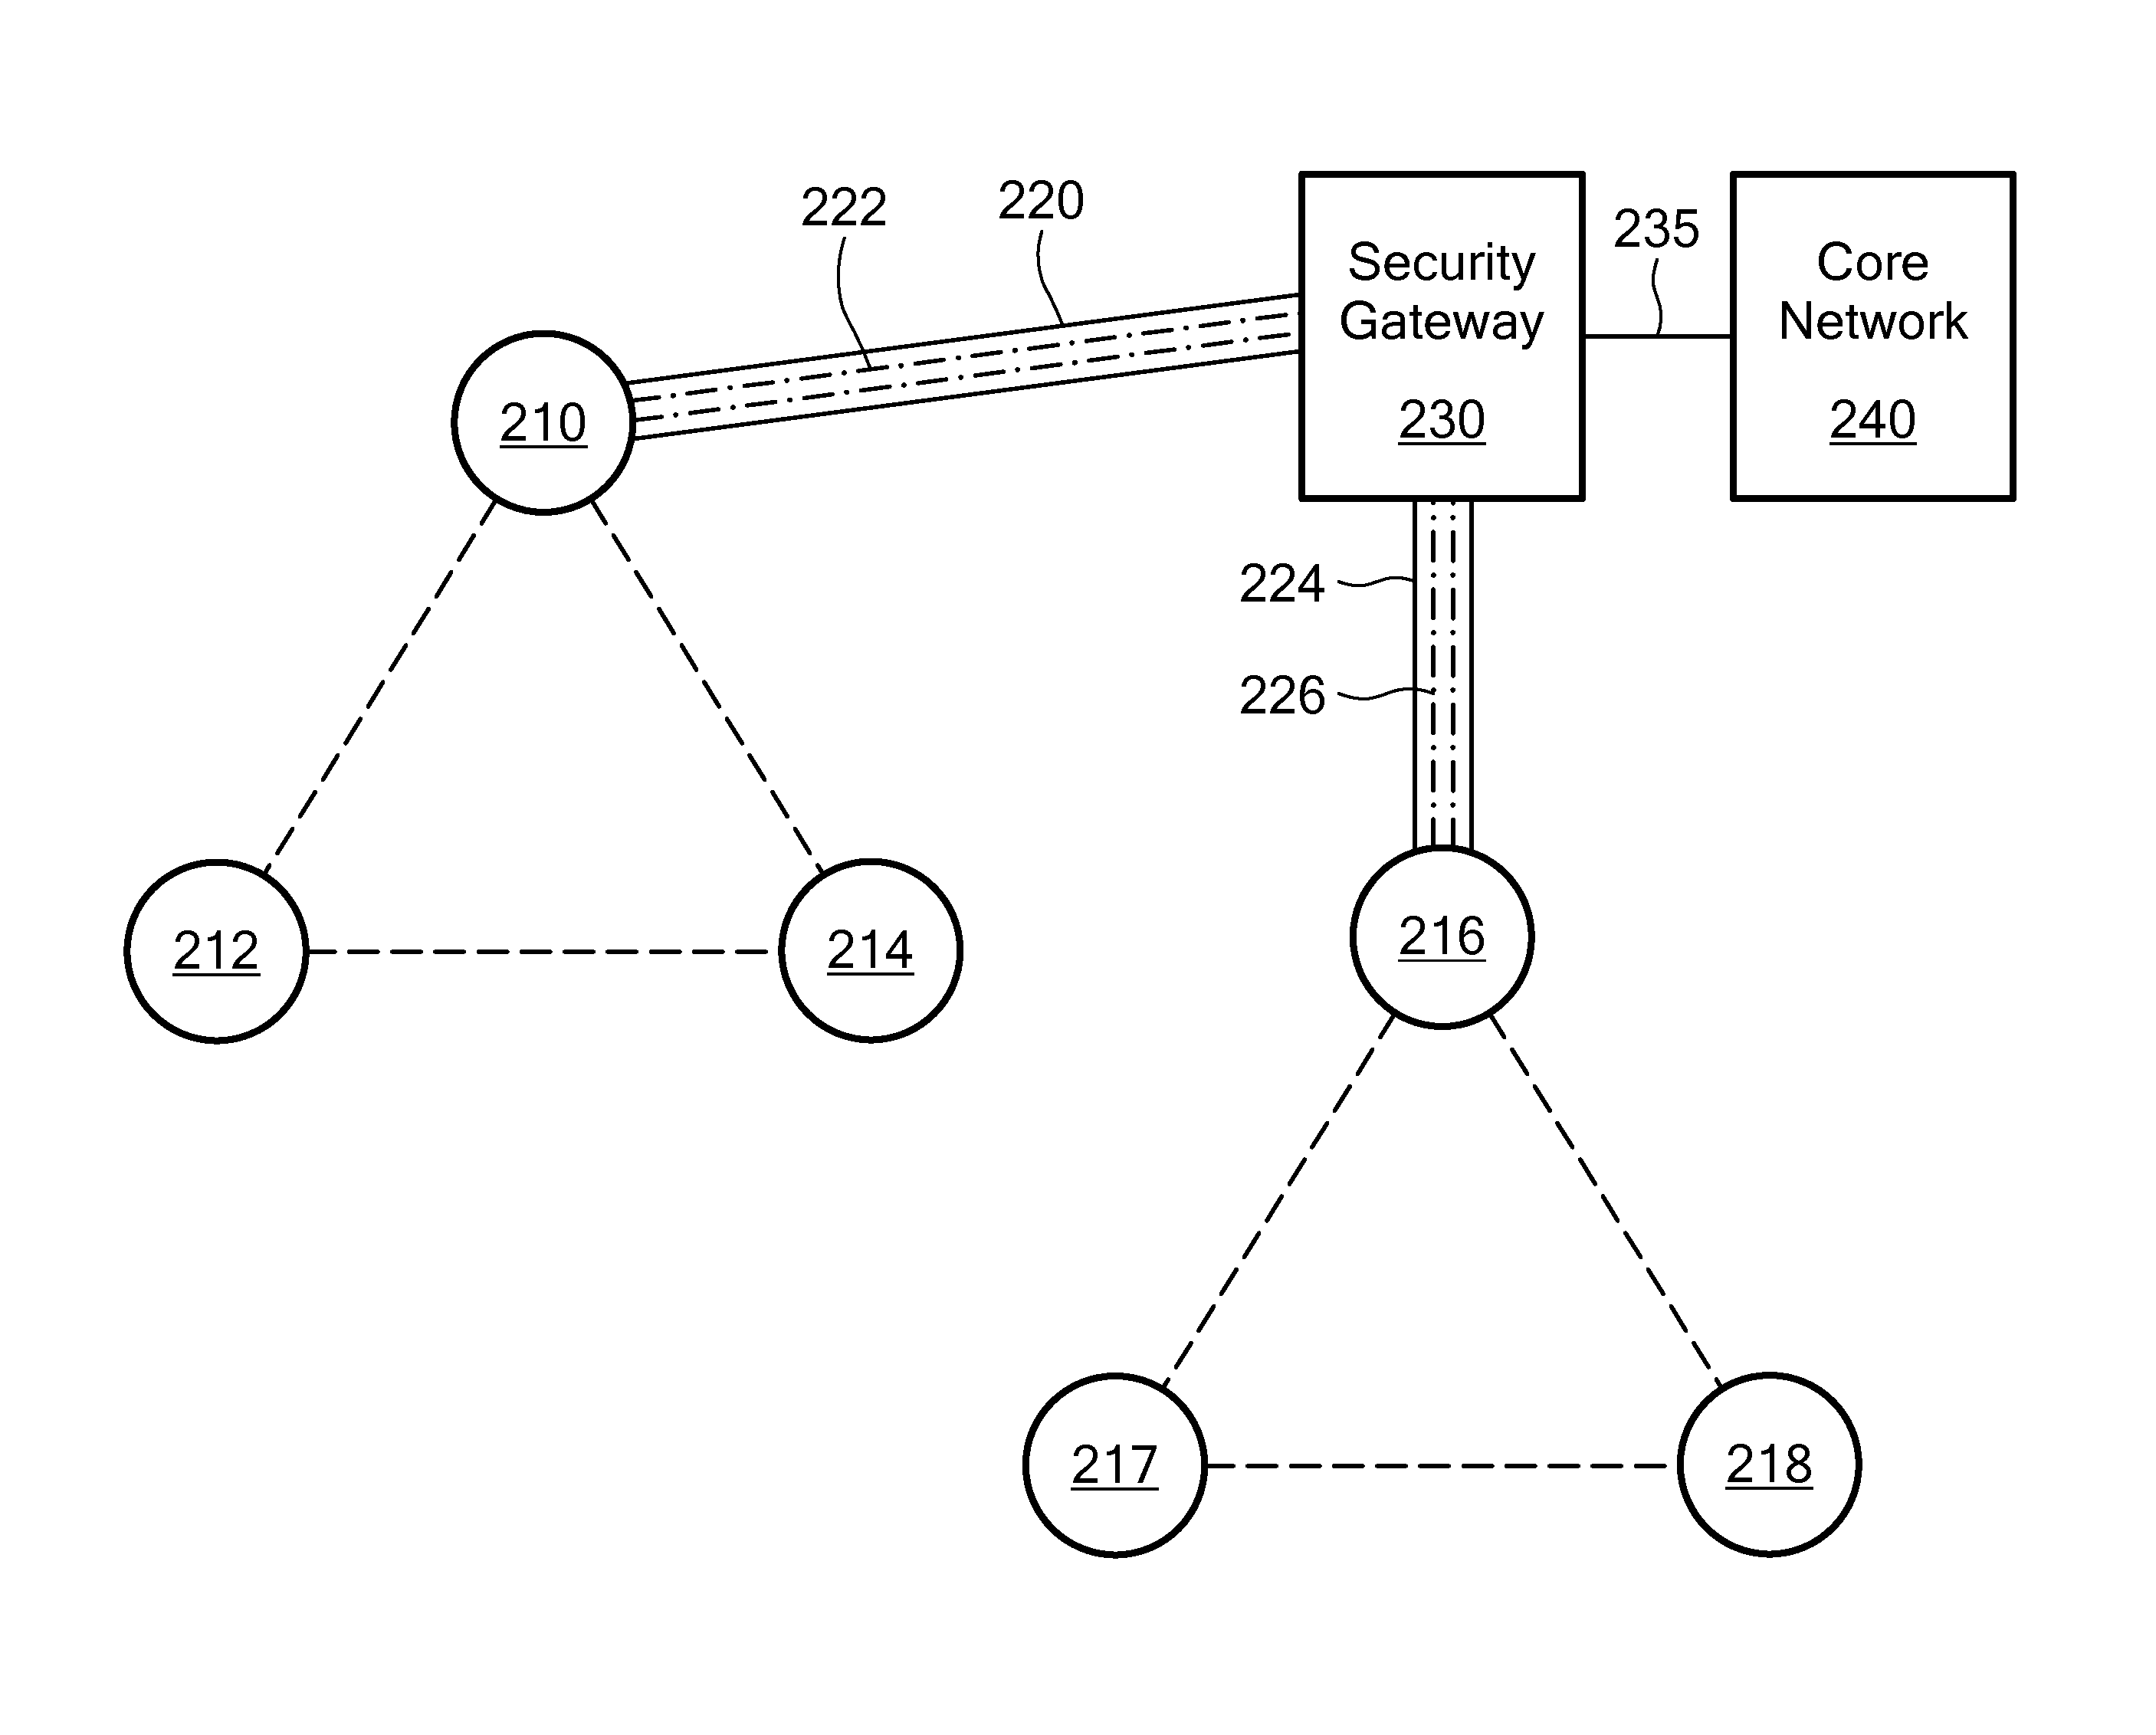 Method of connecting security gateway to mesh network